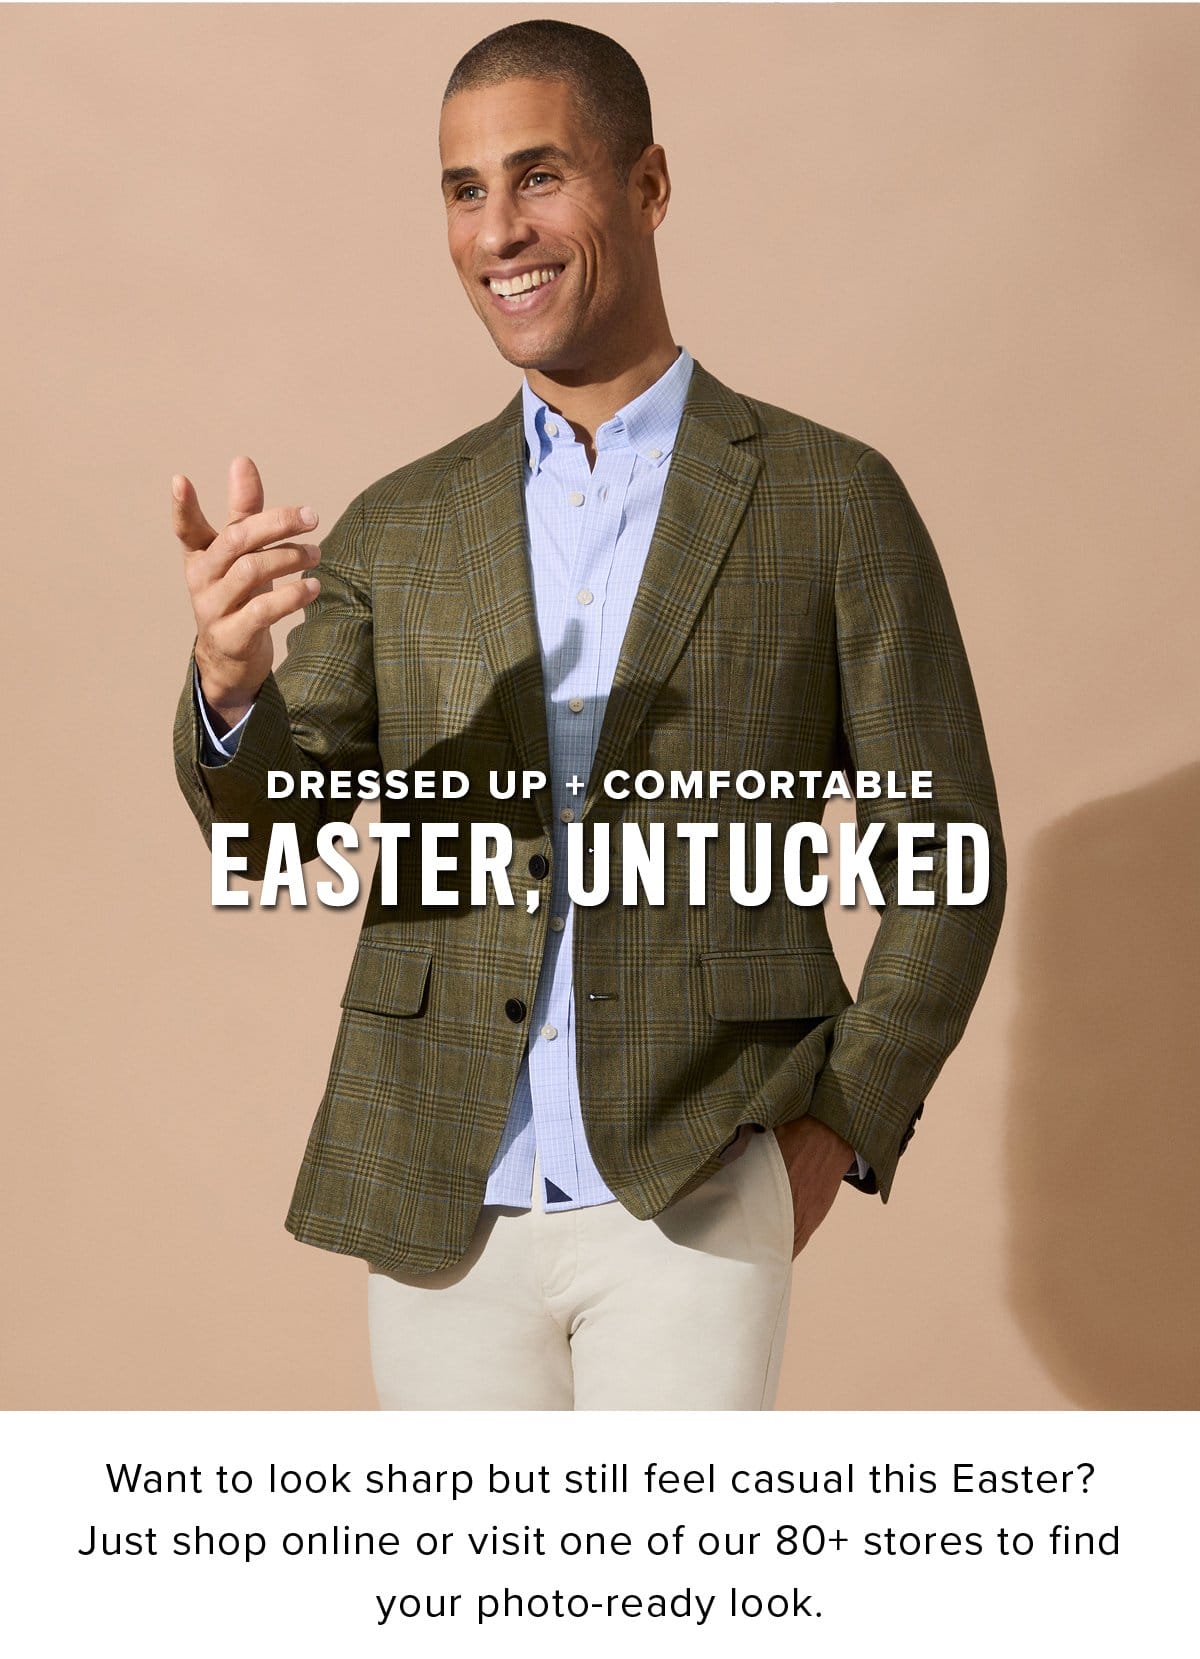 Dressed Up + Comfortable For Easter With UNTUCKit